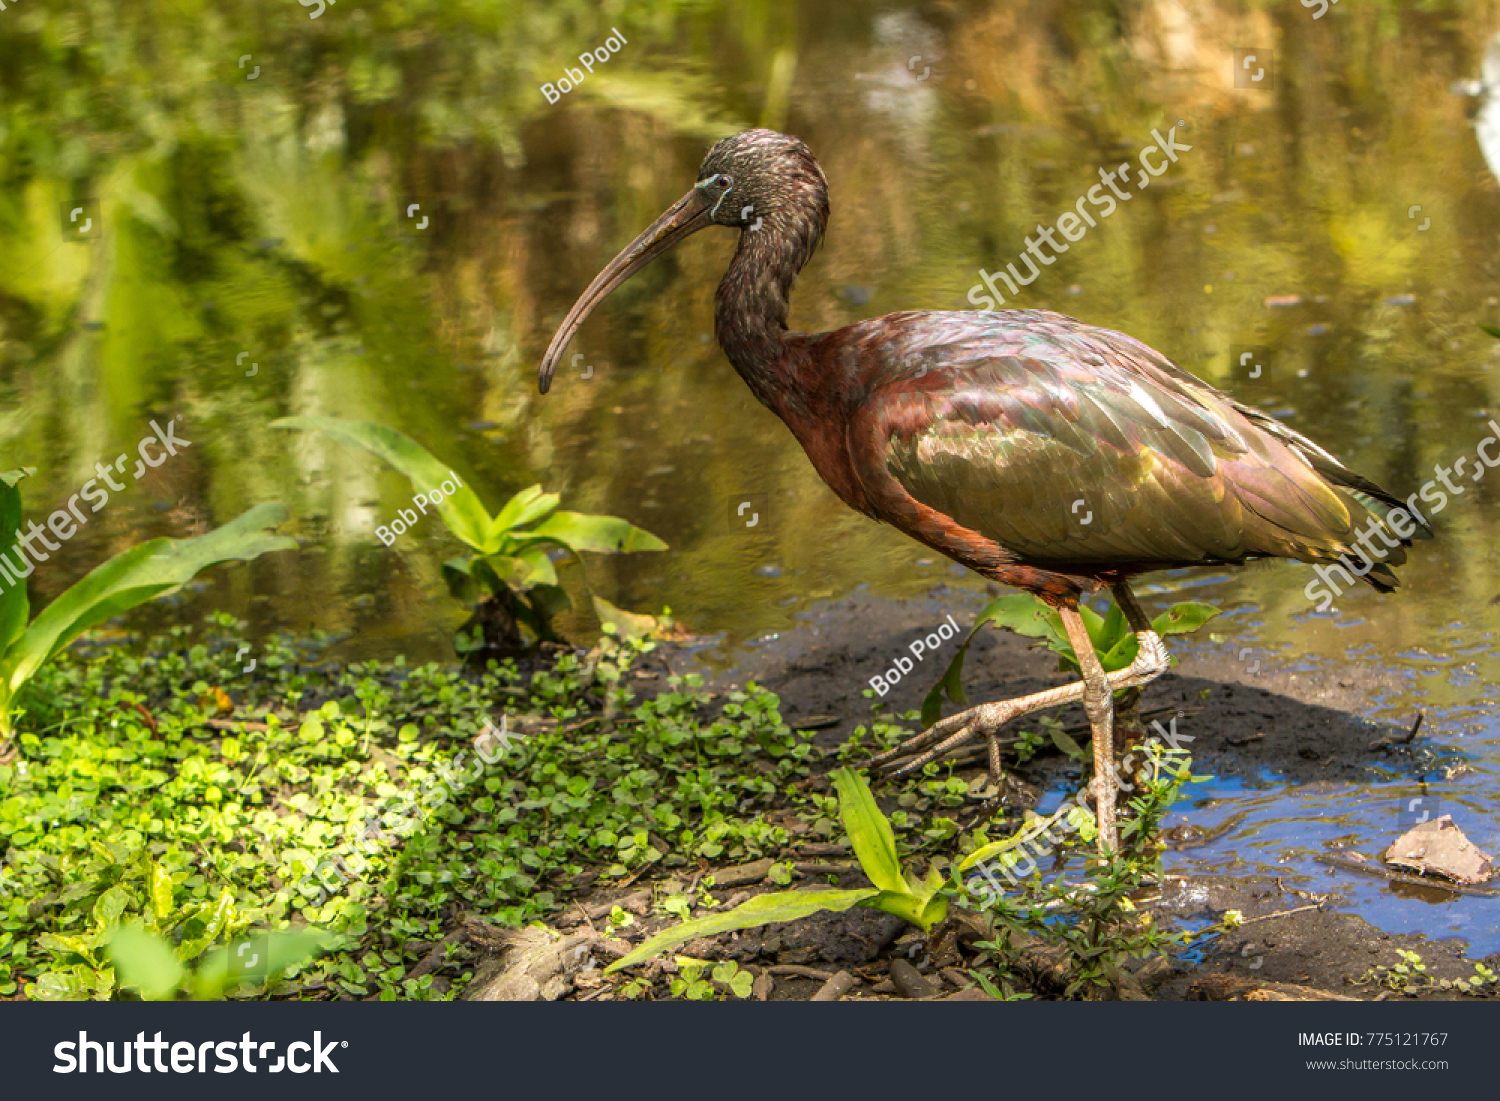 A glossy ibis.  The glossy ibis is a wading bird in the ibis family Threskiornithidae. The scientific name derives from Ancient Greek  meaning "sickle", referring to the shckle shape bill. #775121767